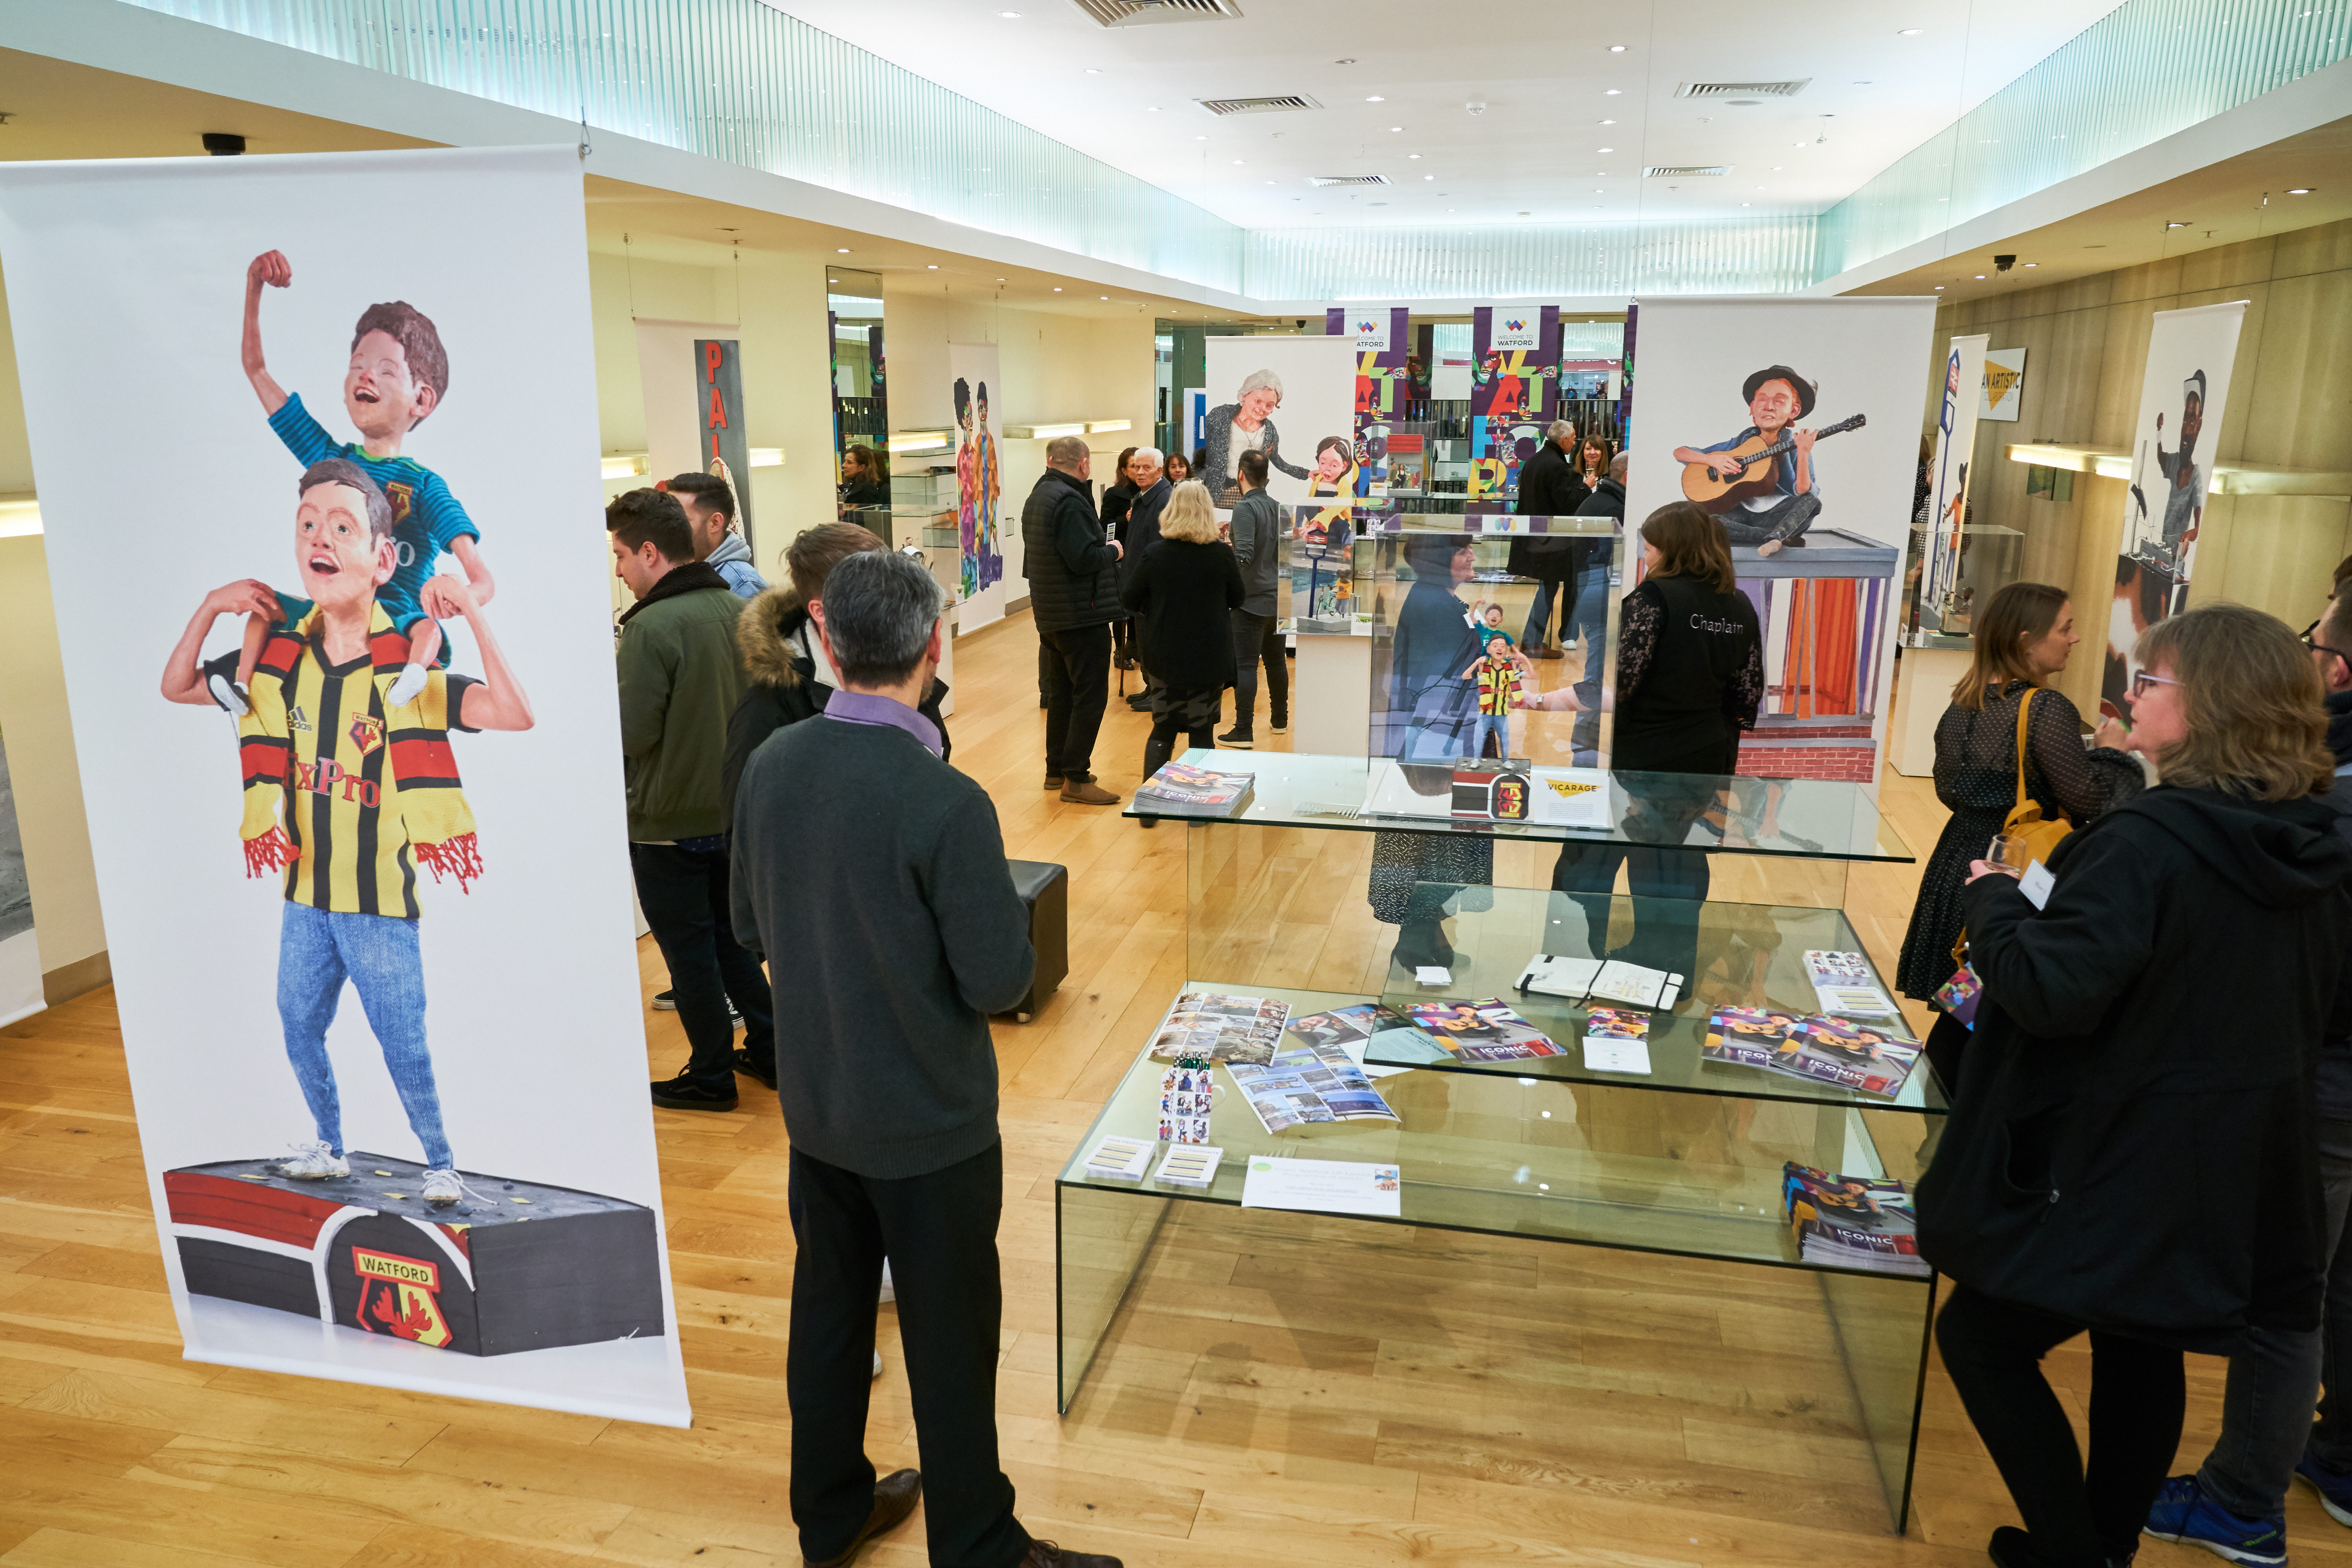 We Are Acuity were challenged by Watford BID to take a successful series of Watford High Street banners to the next level. The result was a a pop-up art gallery that helped locals and visitors alike connect to the pride and passion of our historic Hertfordshire town.